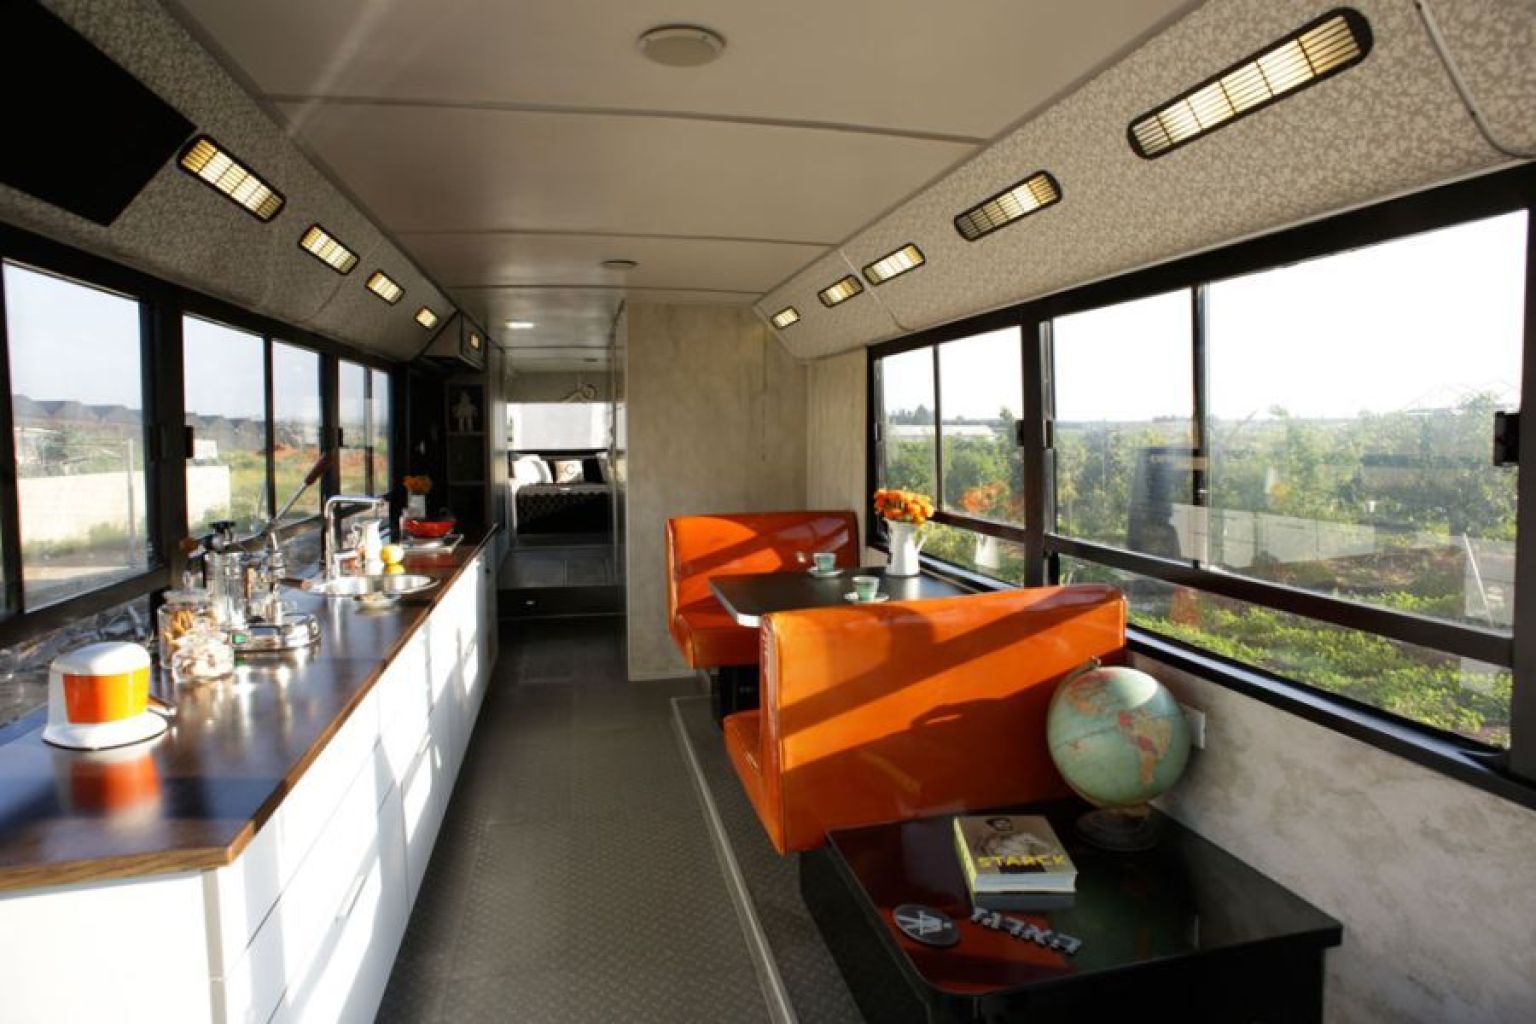 Bus Converted Into A Home In Sharon, Israel Will Totally Change Your